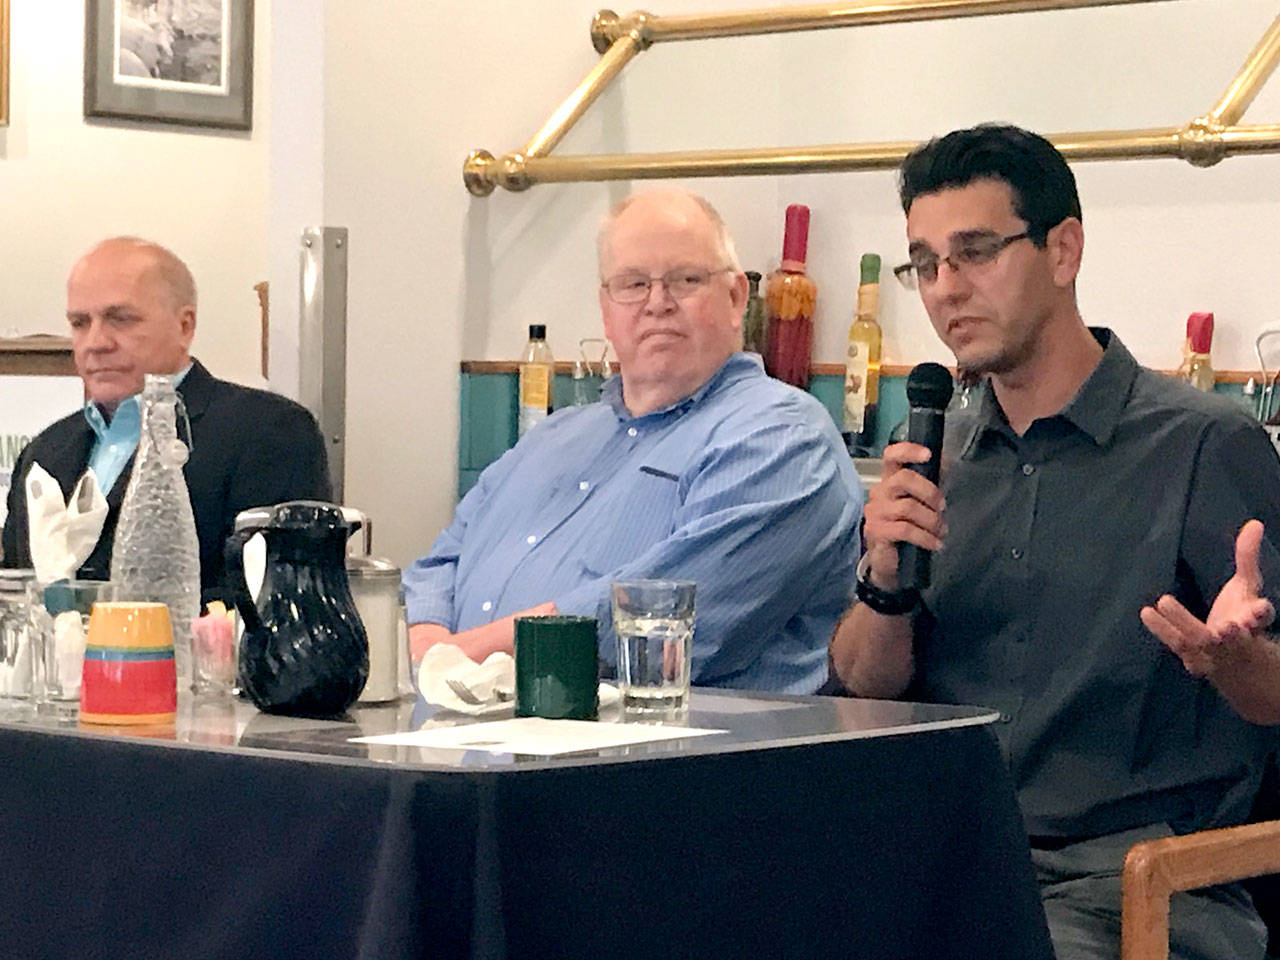 Port Angeles City Council candidates Artur Wojnowski, right, Richard “Doc” Robinson, center, and Charlie McCaughan aired their views Tuesday at a primary election forum. (Paul Gottlieb/Peninsula Daily News)